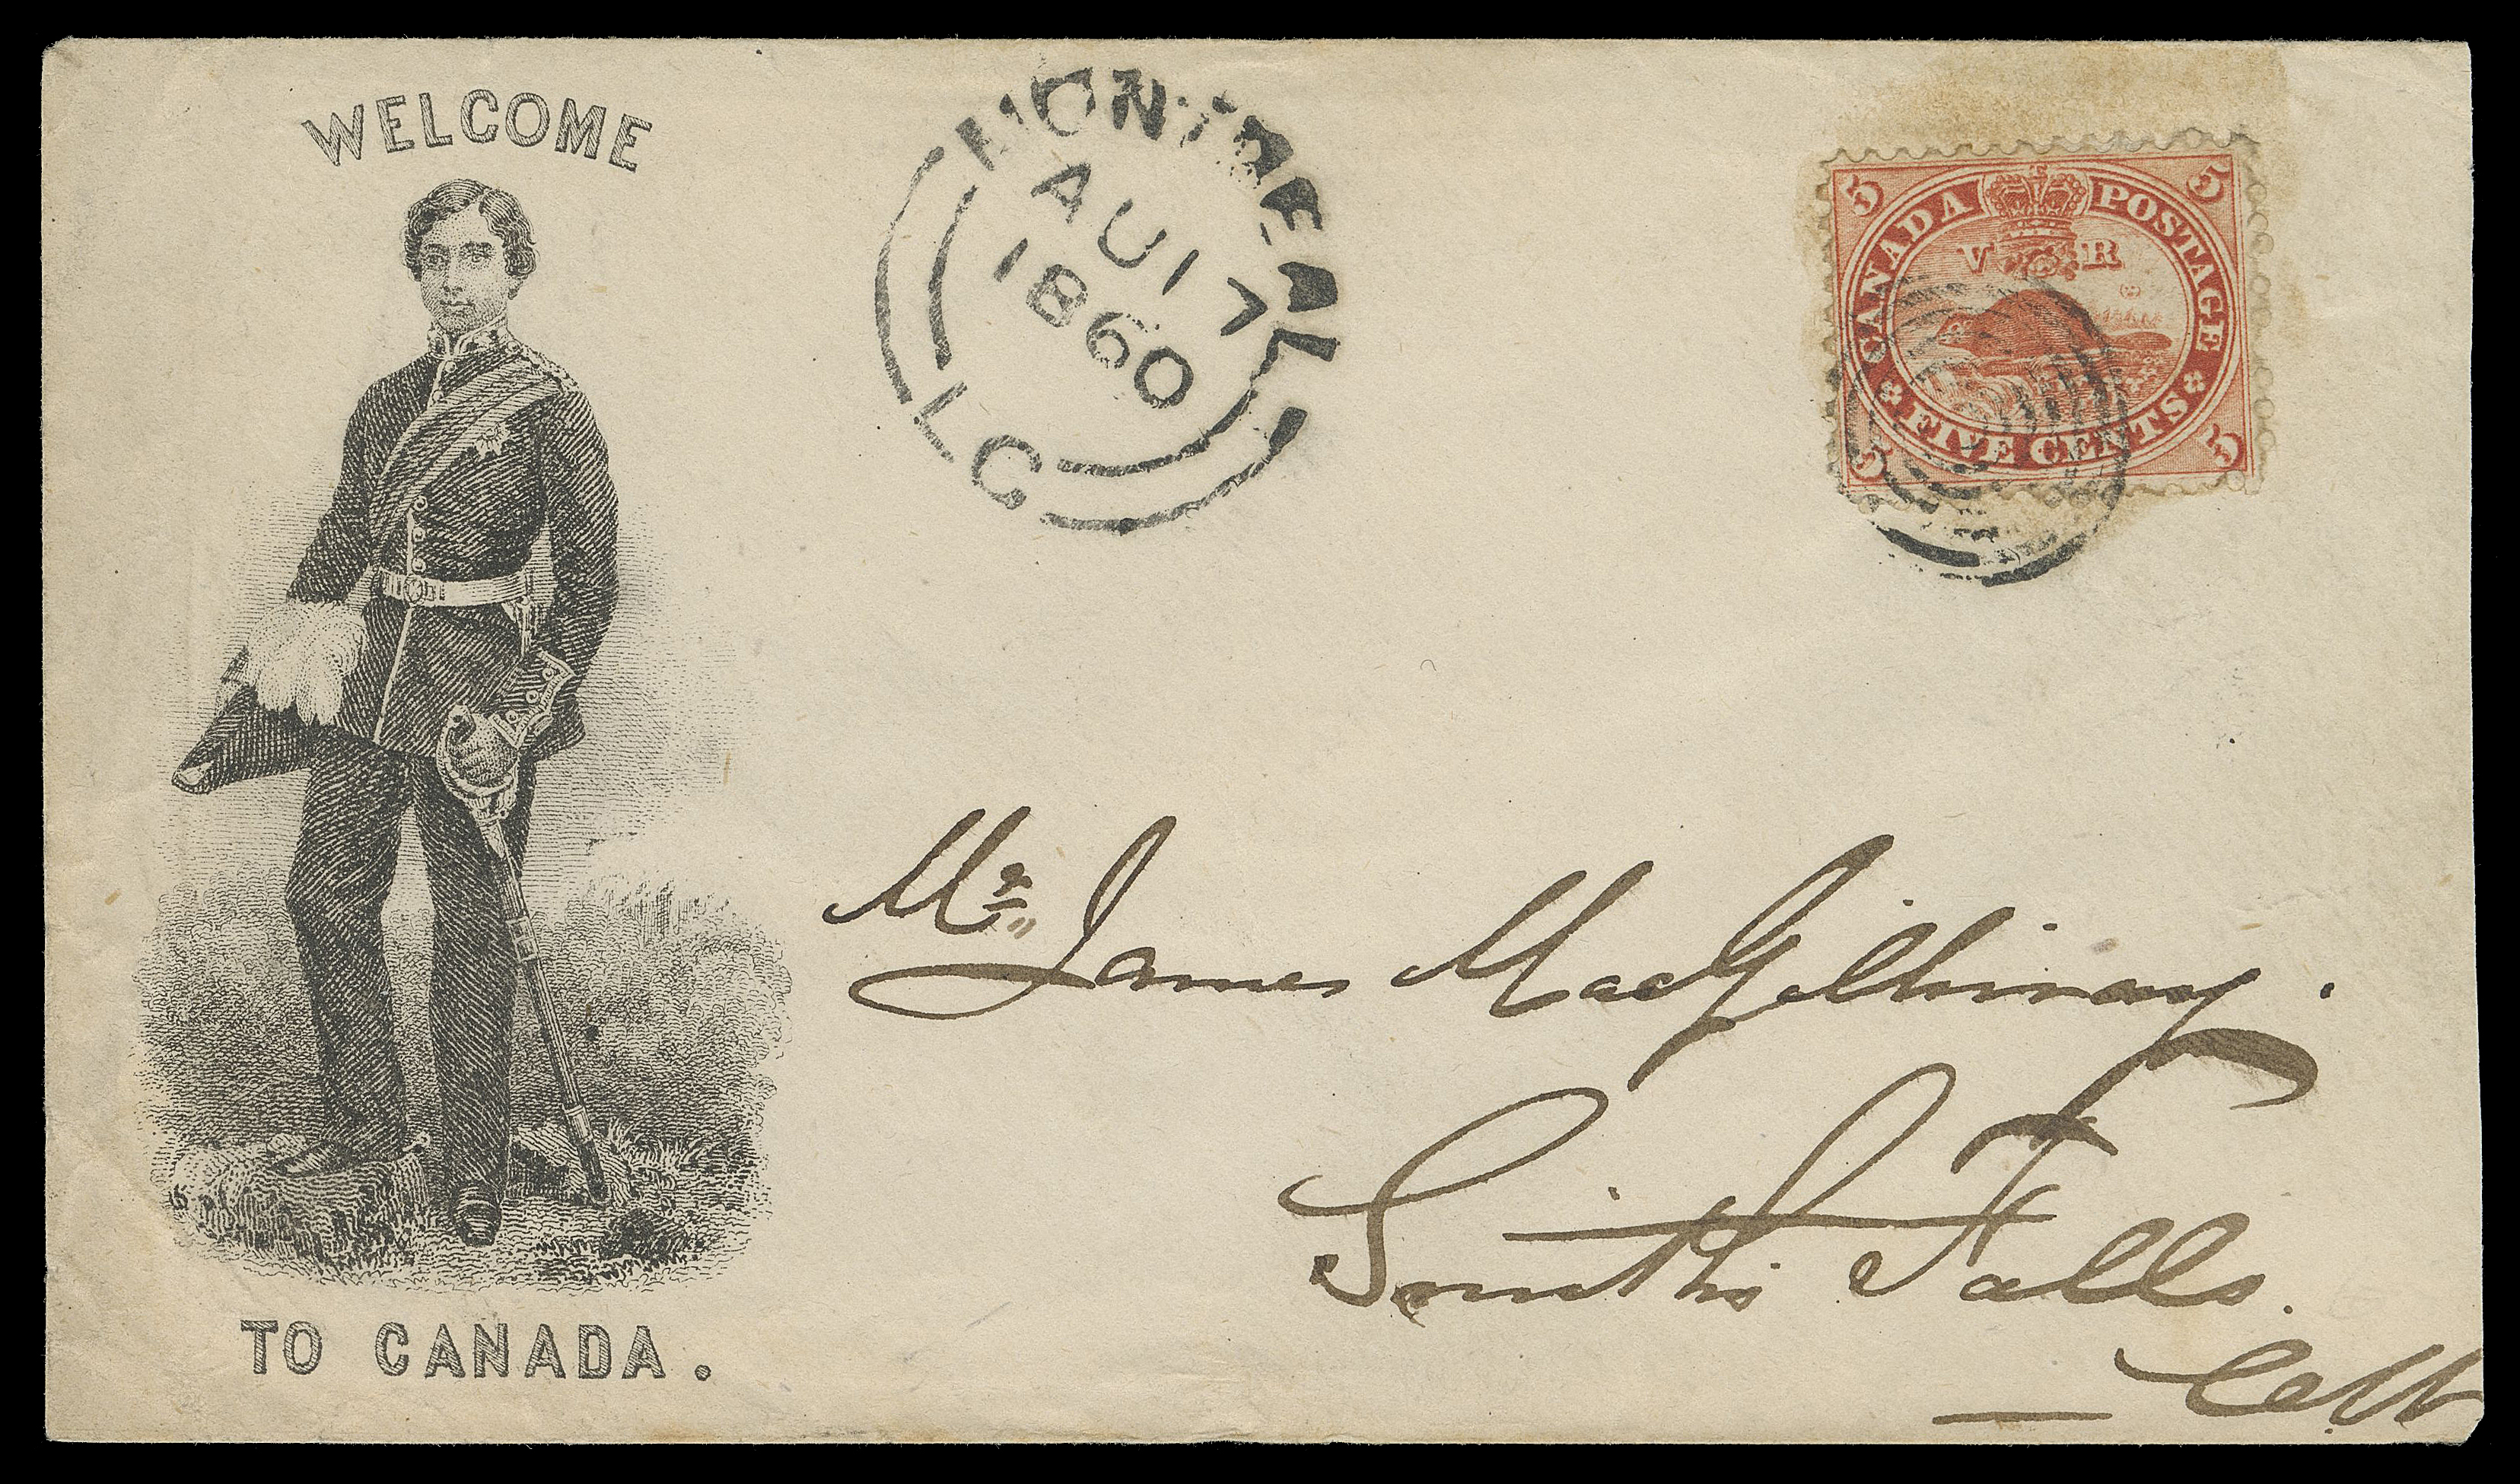 THREE PENCE AND FIVE CENTS  1860 (August 17) Prince Albert in Military Uniform "Welcome to Canada" illustrated patriotic cover, franked with an early printing 5c deep vermilion, perf 11¾, tied by concentric rings, light gum staining around stampg, clear Montreal double arc dispatch, addressed to Smiths Falls; light wrinkling at left and slightly reduced at right, nevertheless a beautiful cover - one of the very few known Prince Albert patriotic covers, F-VF (Unitrade 15 early printing)

Literature: Illustrated and discussed in Arfken & Leggett "Canada